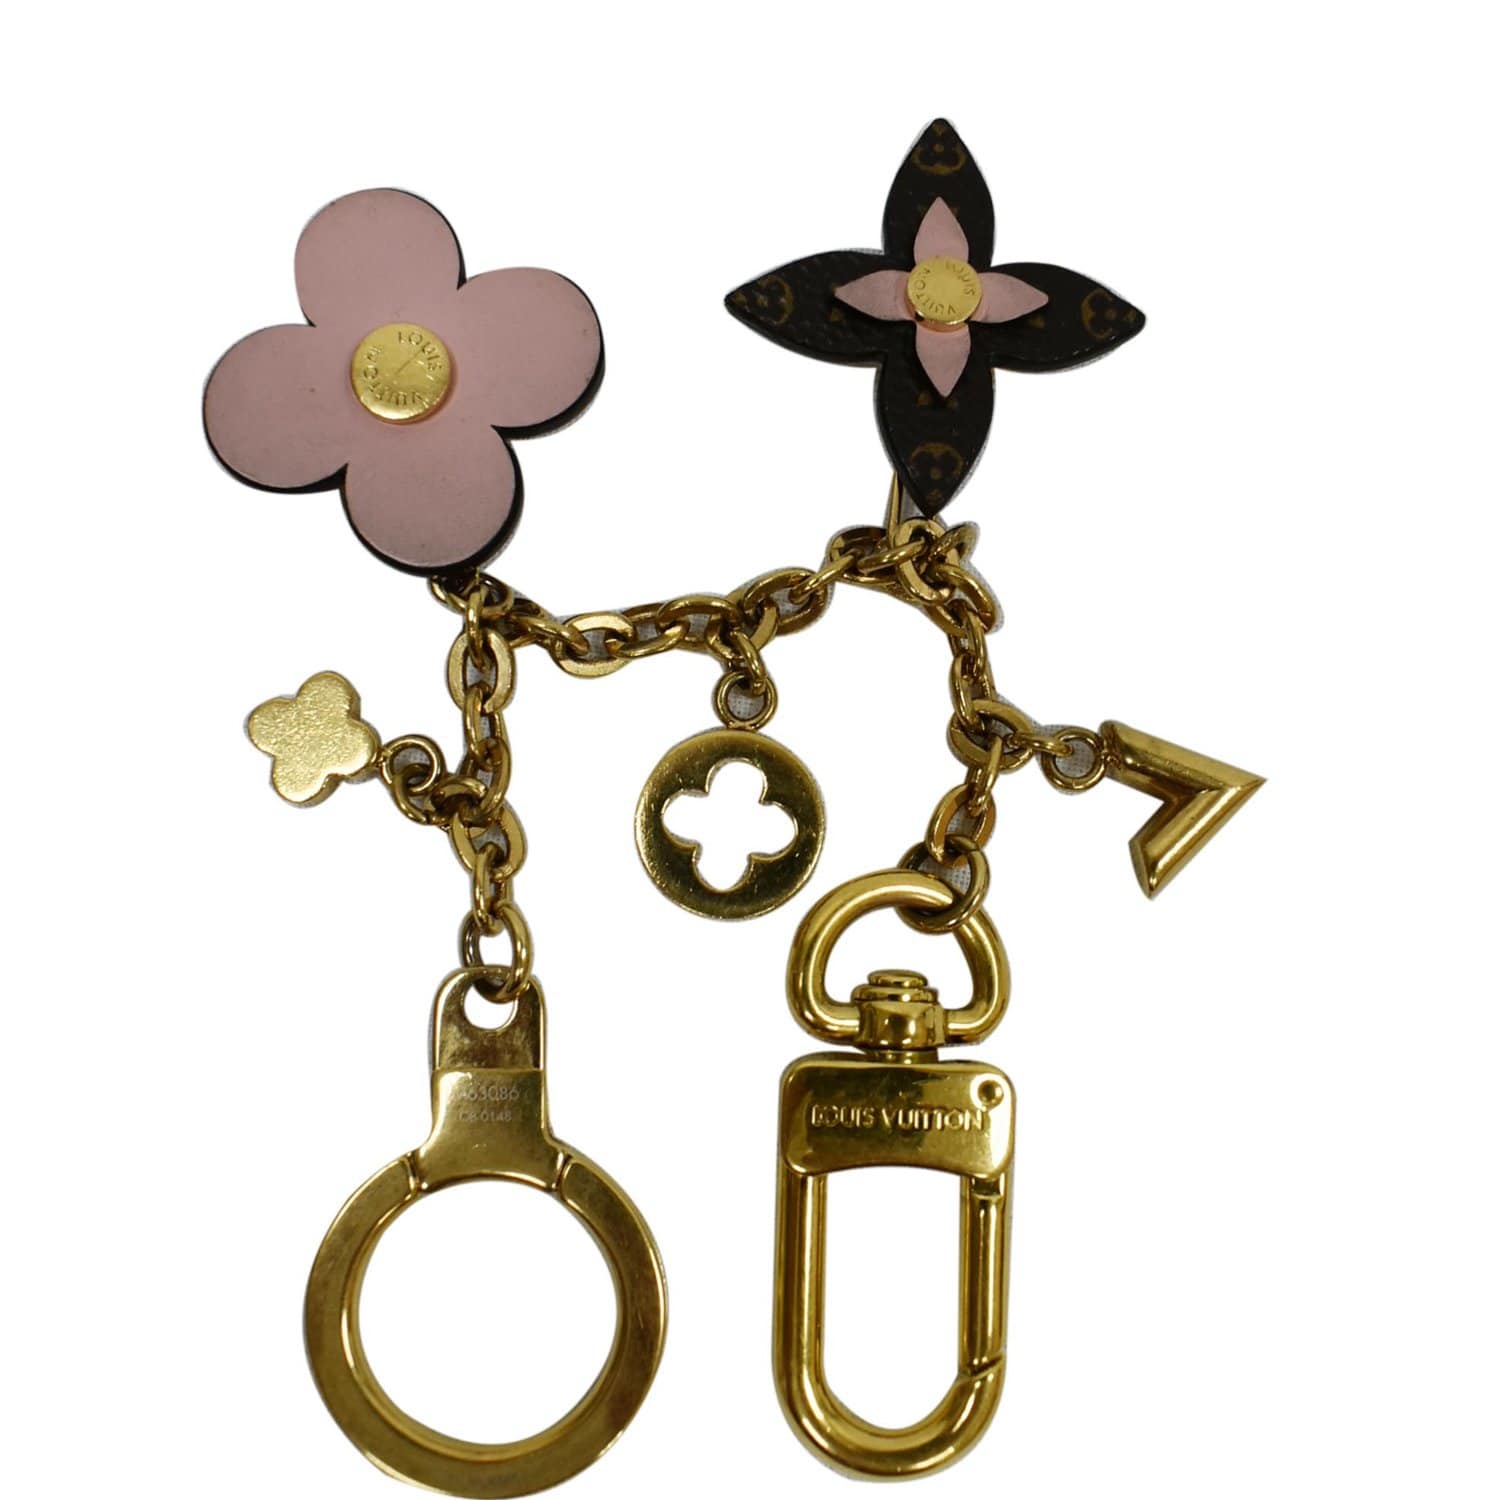 Blooming Flowers Chain Bag Charm and Key Holder S00 - Accessories